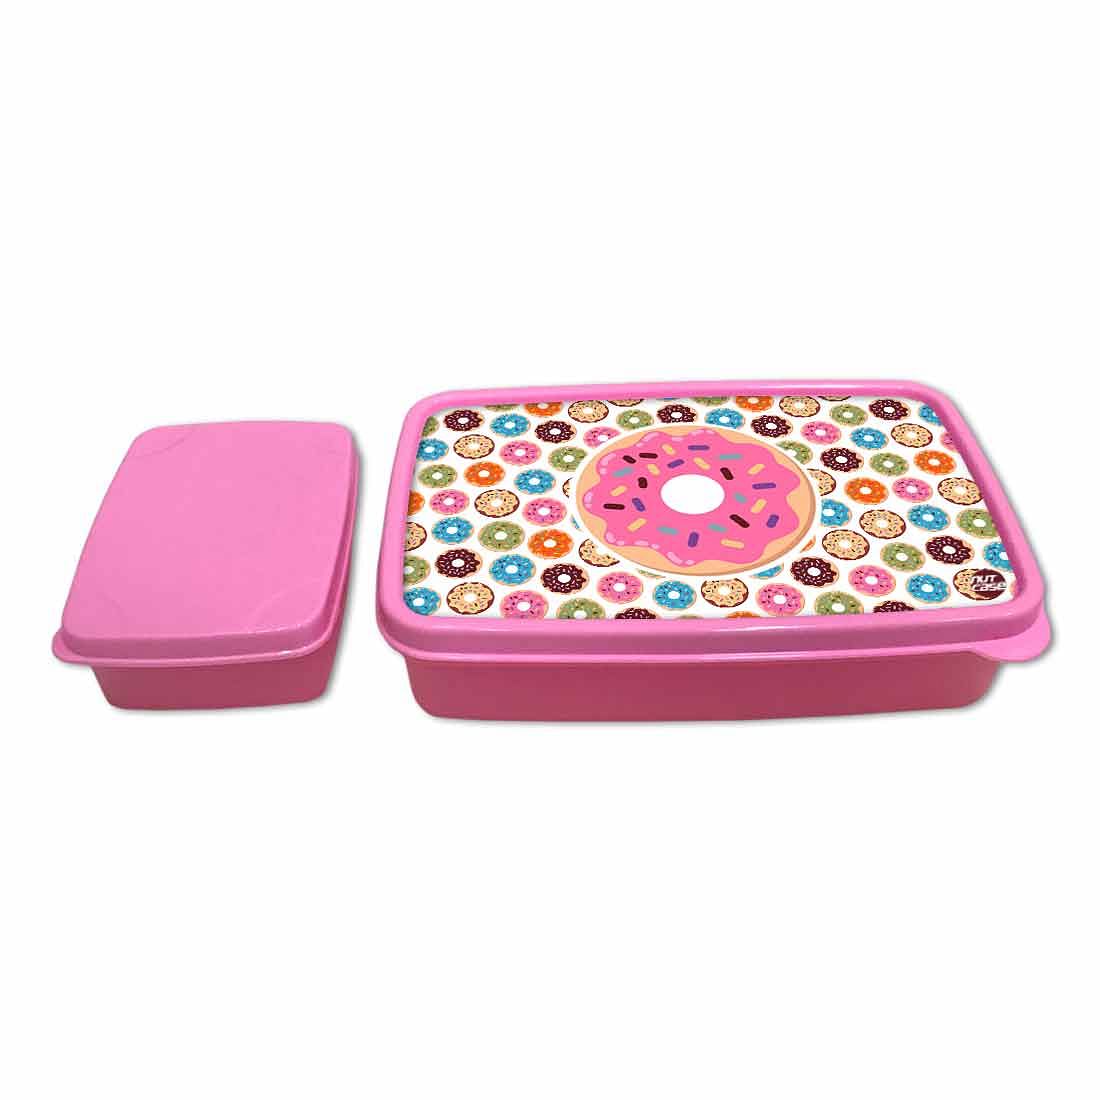 Designer Kids Plastic Lunch Box for Girls With Small Container - Doughnuts Nutcase